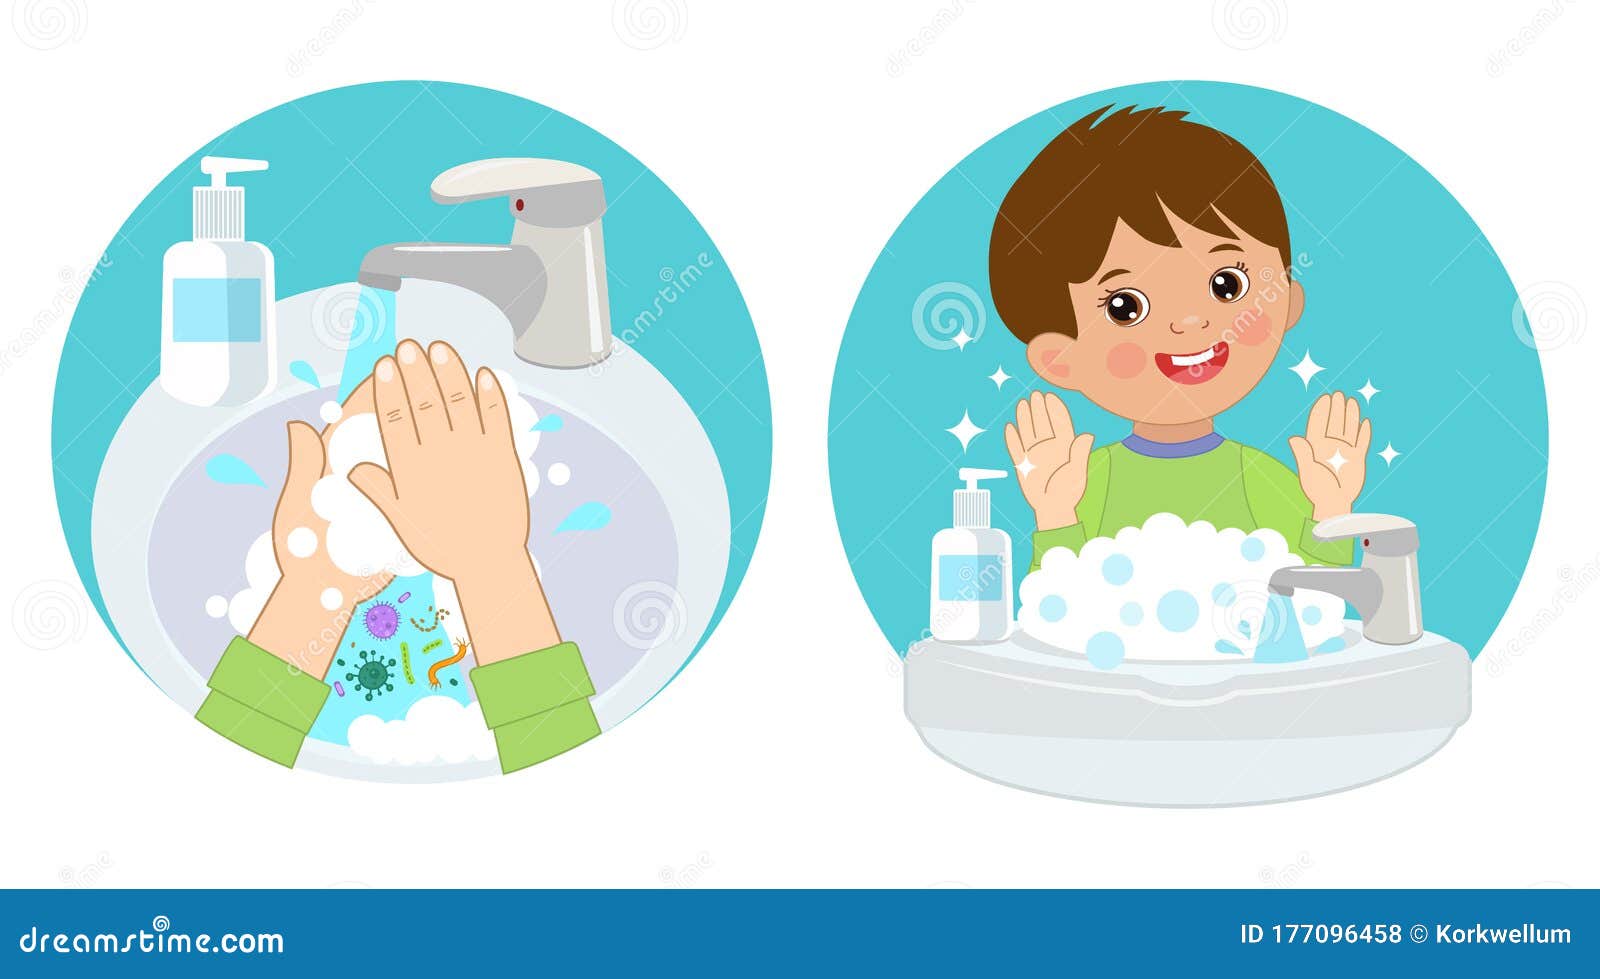 dirty hands, clear hands, before and after. hand hygiene  icons in the circle. wash you hands banner for kids.